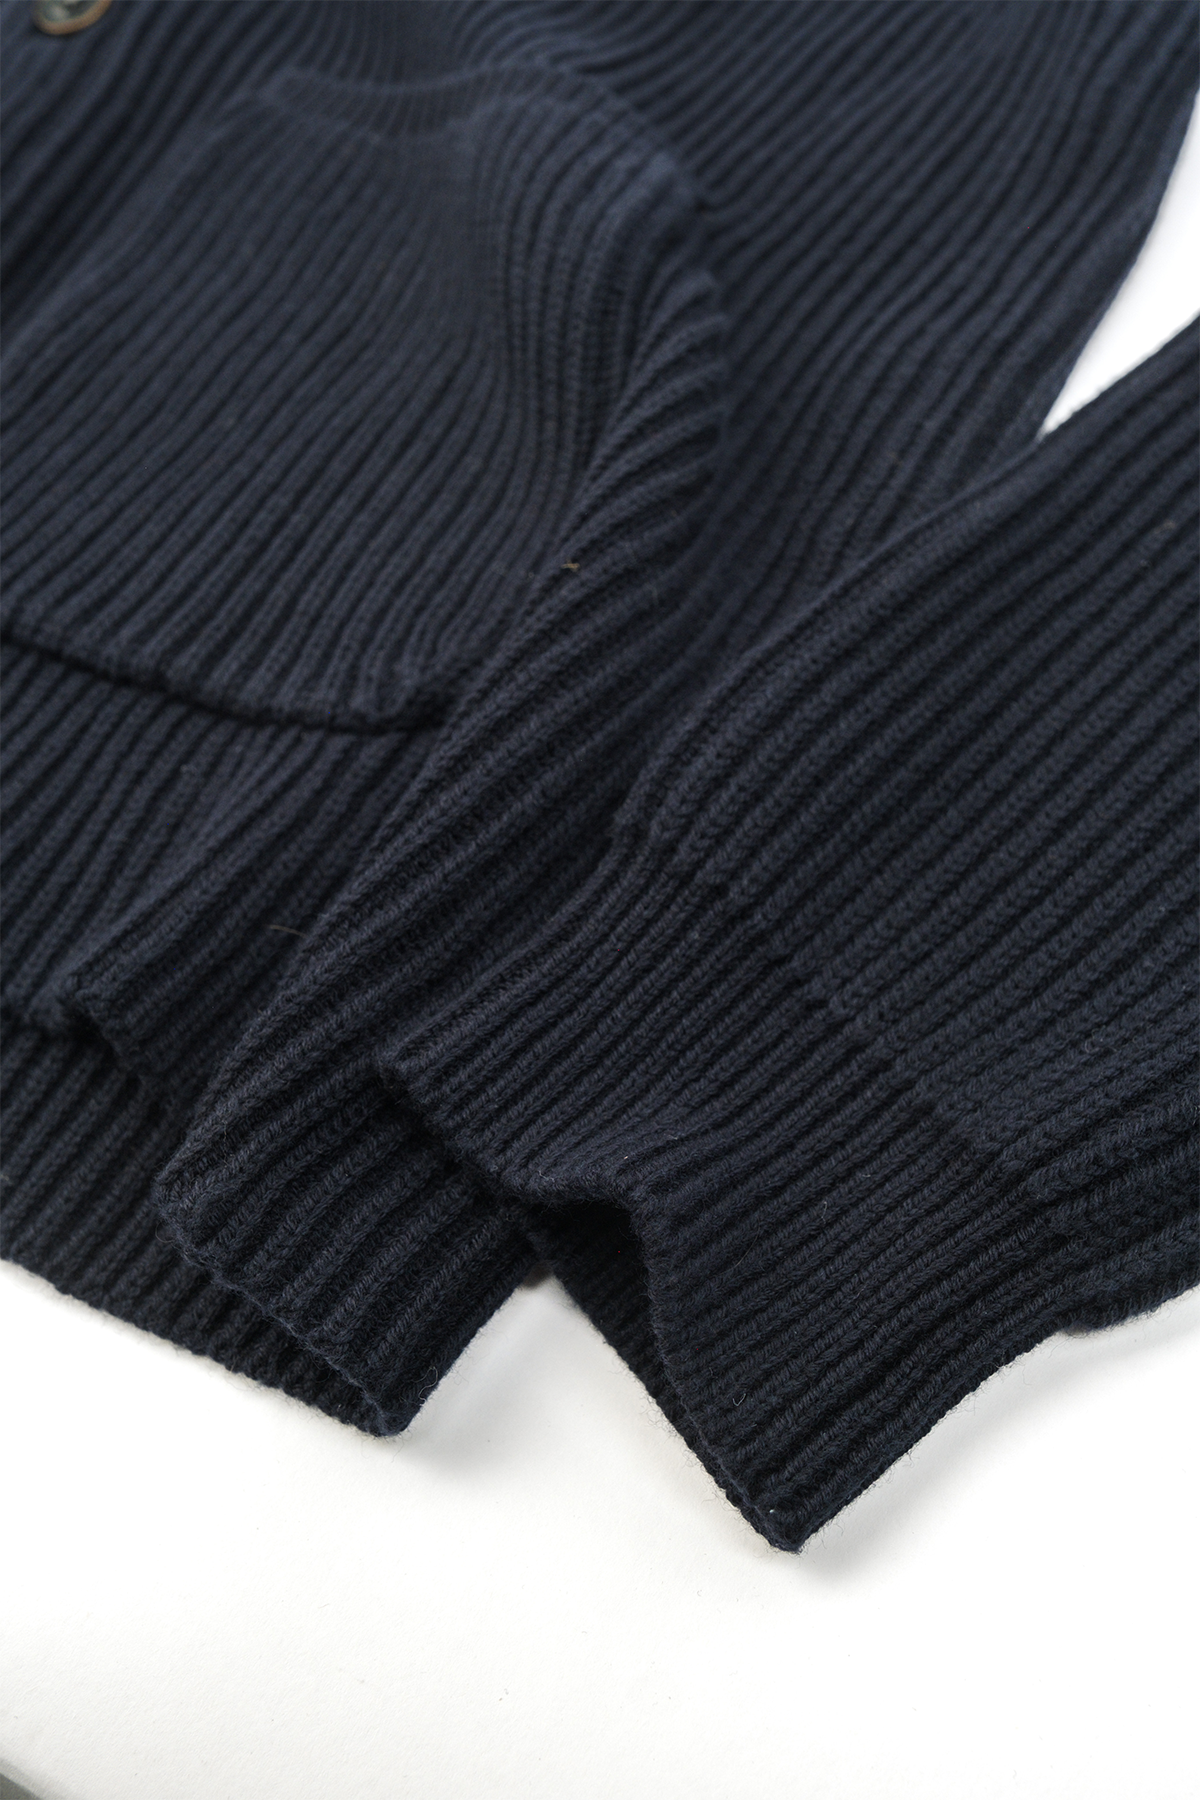 Close up photo on the details of the Freddy Cardigan, specifically looking at the sleeves. 